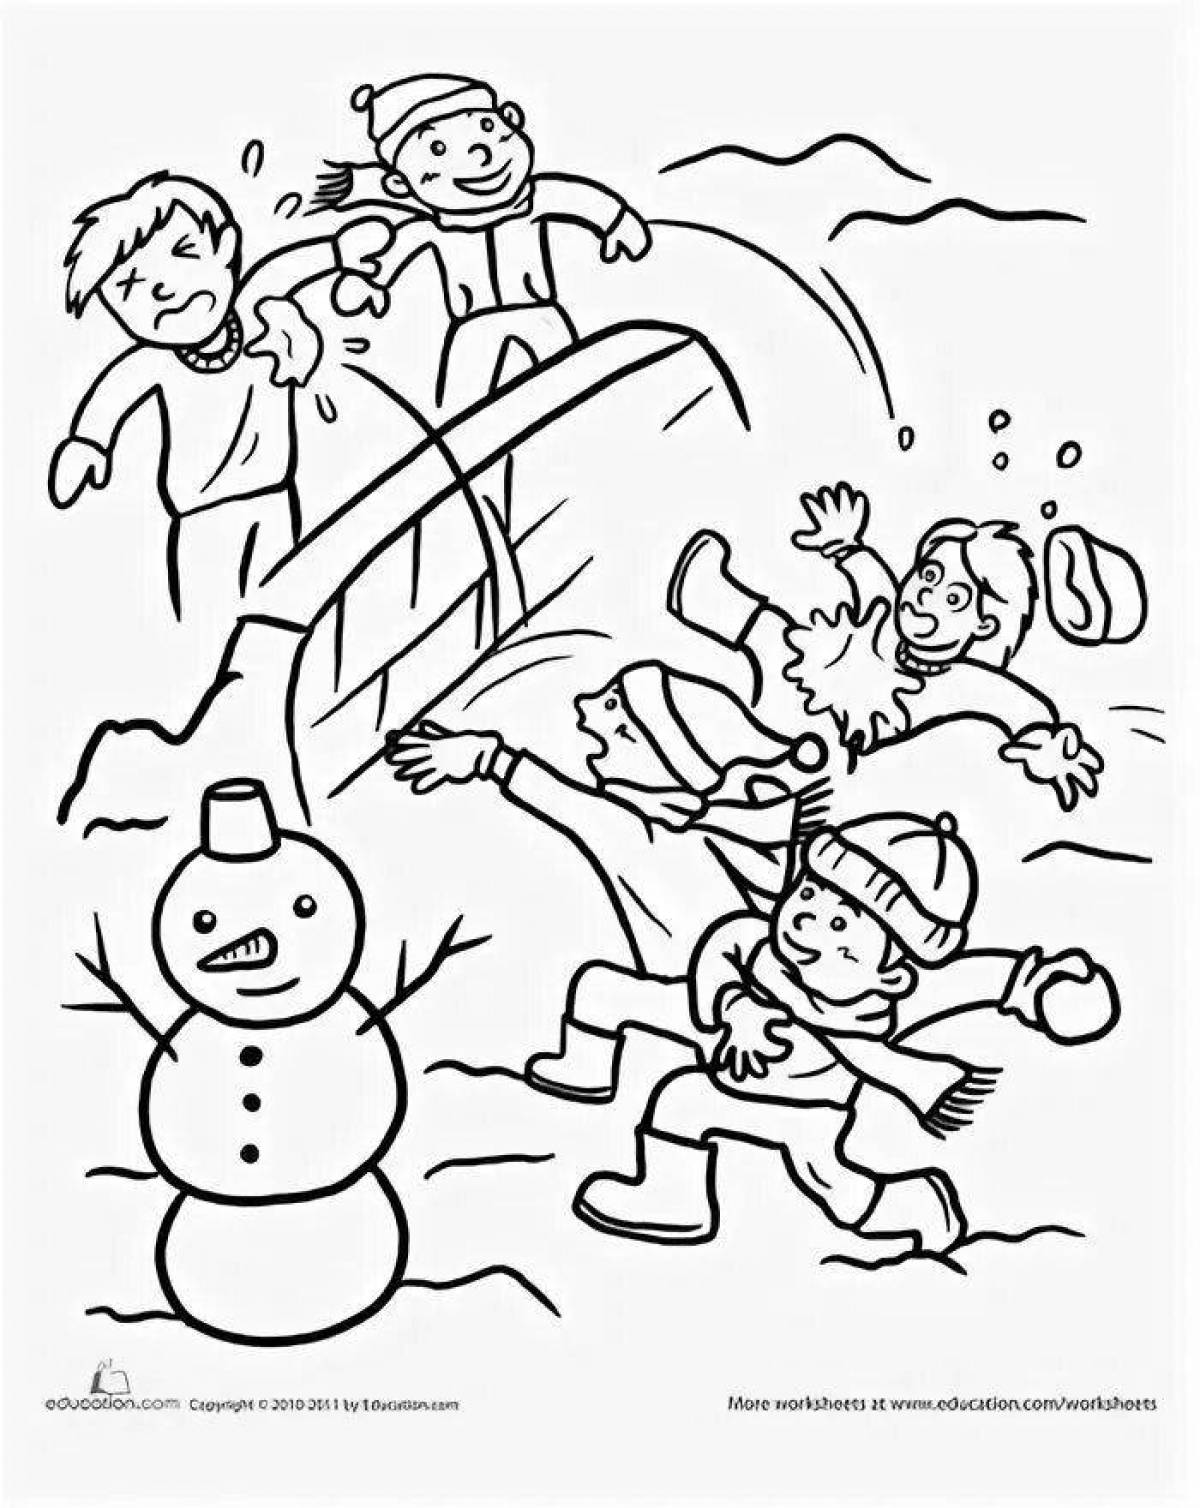 Inspirational winter safety coloring page